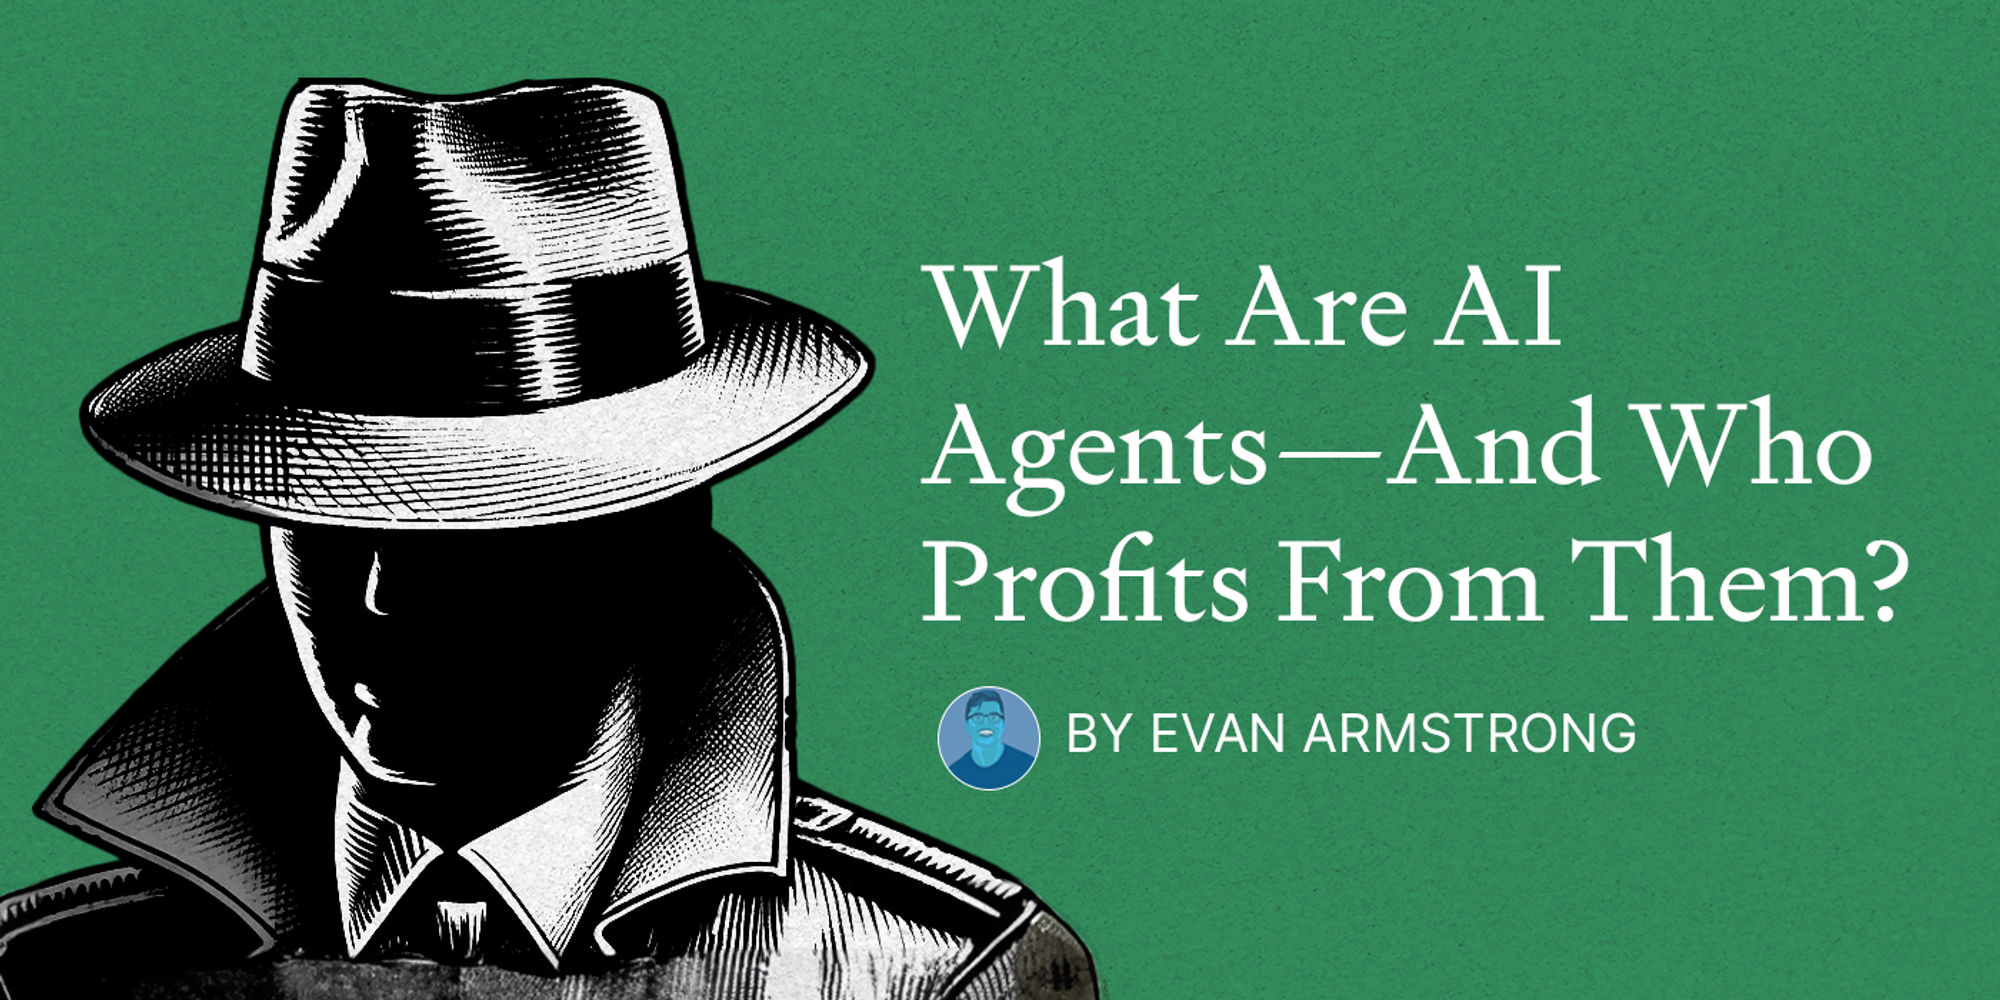 What Are AI Agents—And Who Profits From Them?